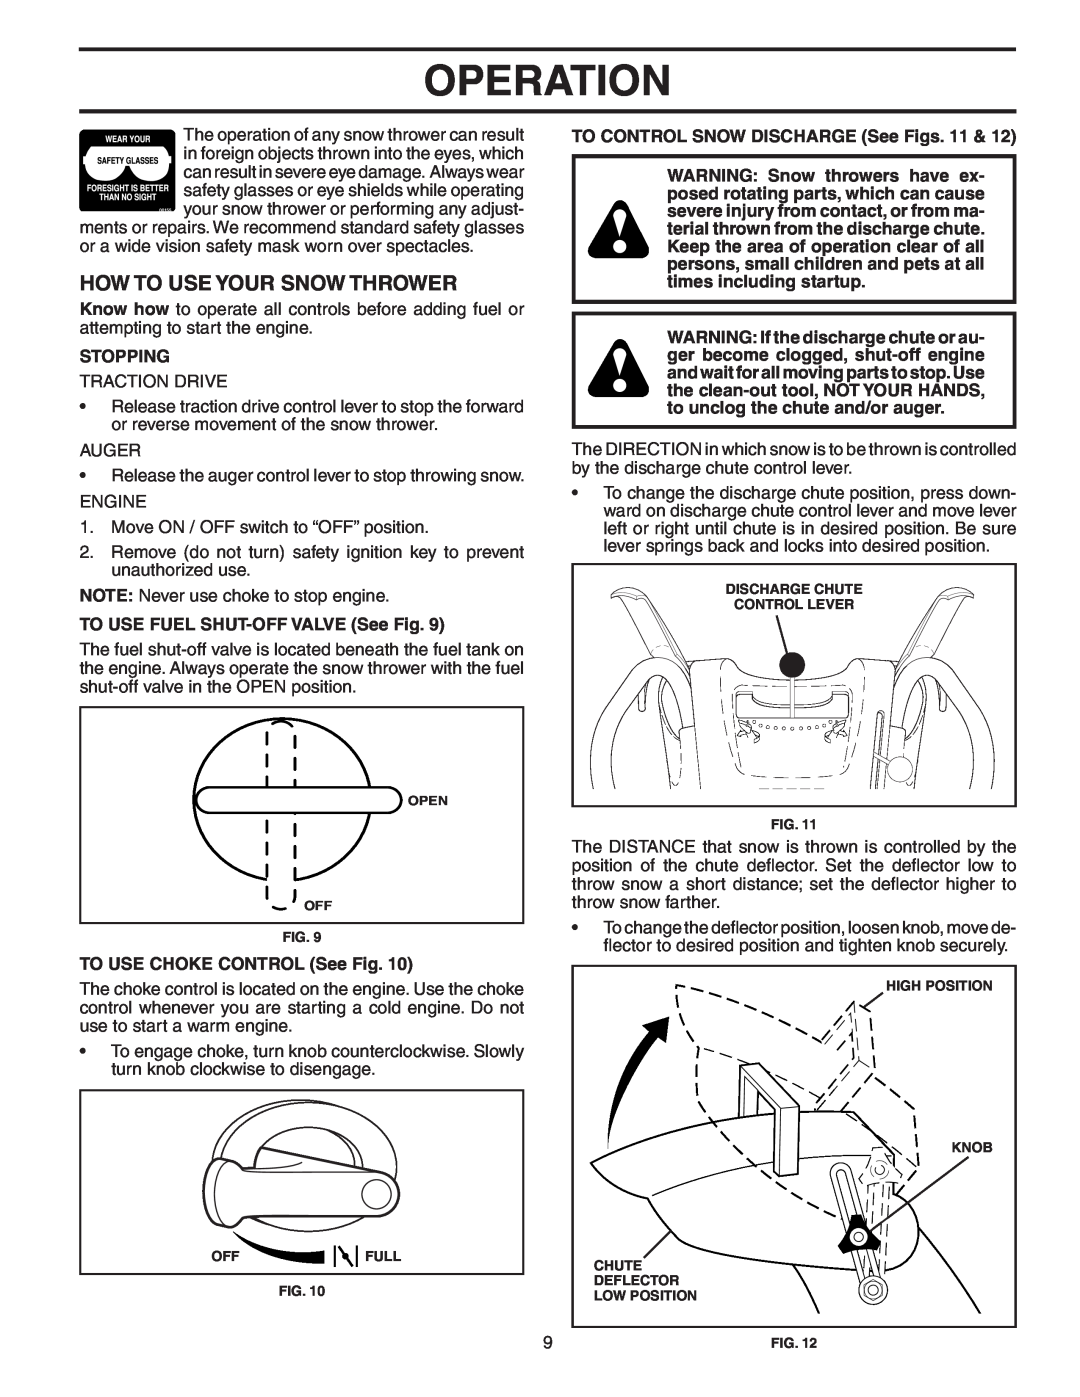 Poulan 403919, 96192000900 How To Use Your Snow Thrower, Operation, Stopping, TO USE FUEL SHUT-OFF VALVE See Fig 